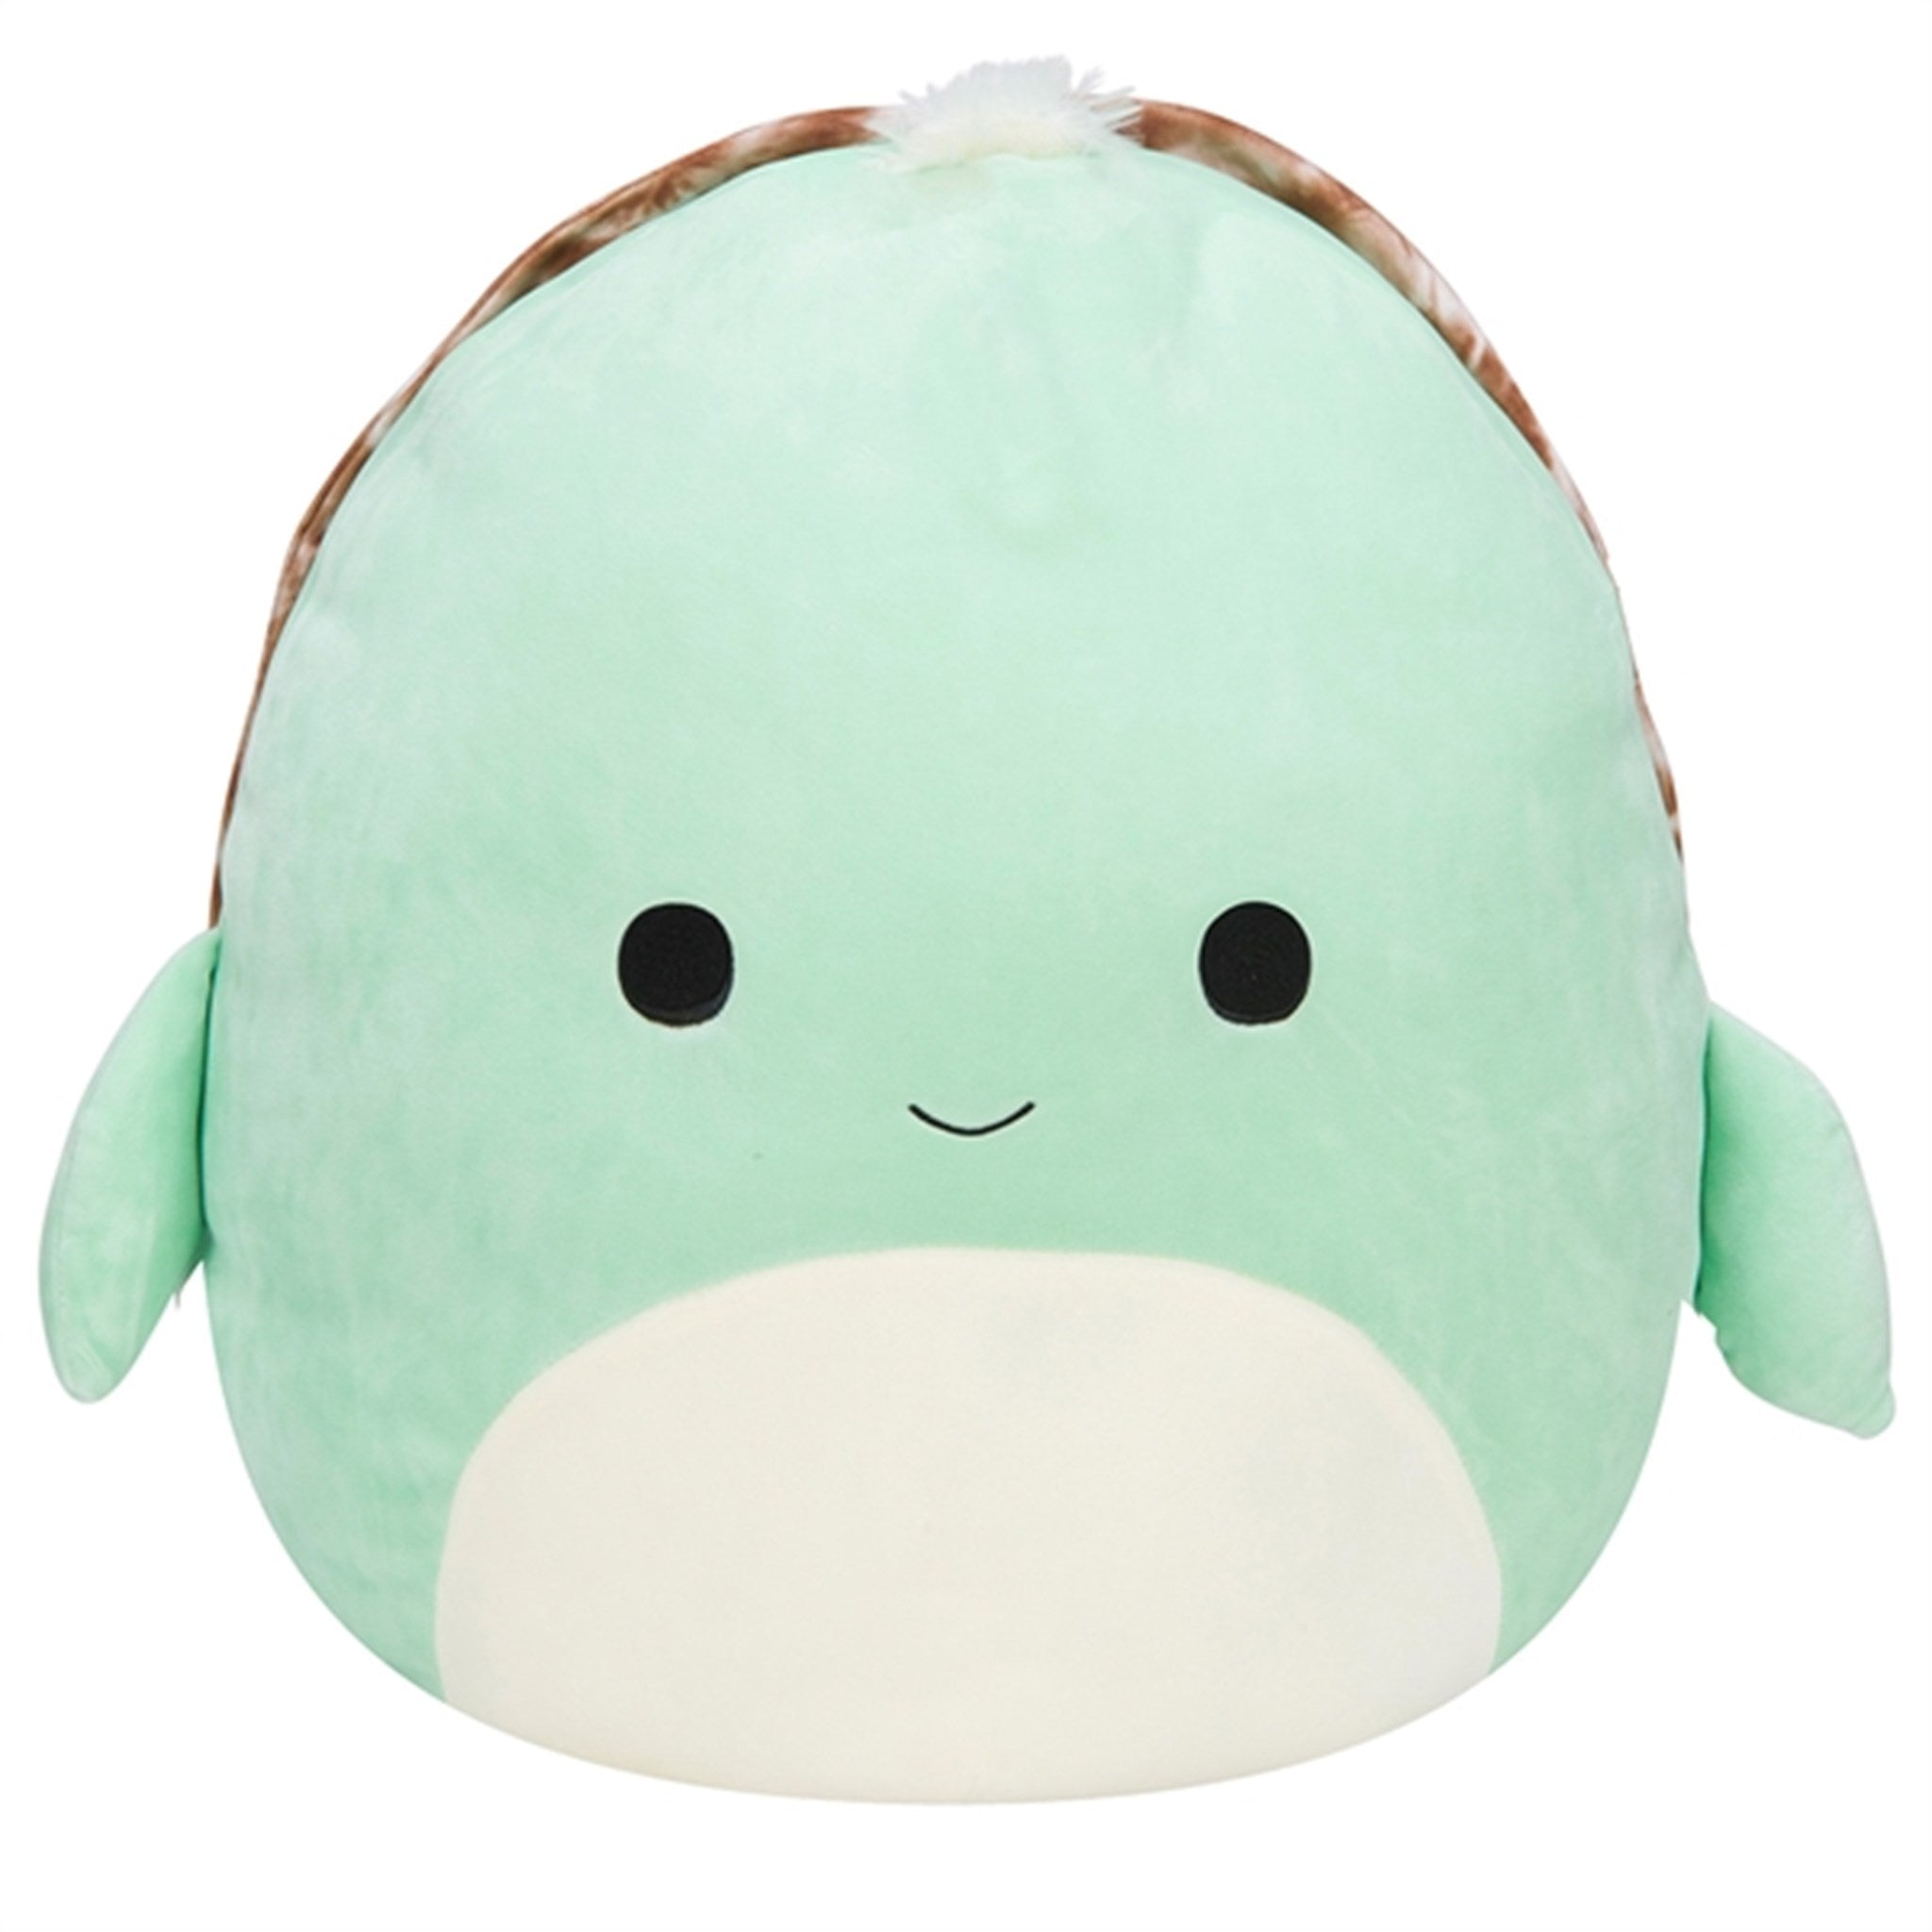 Squishmallows Onica the Mint Turtle 19 cm P12